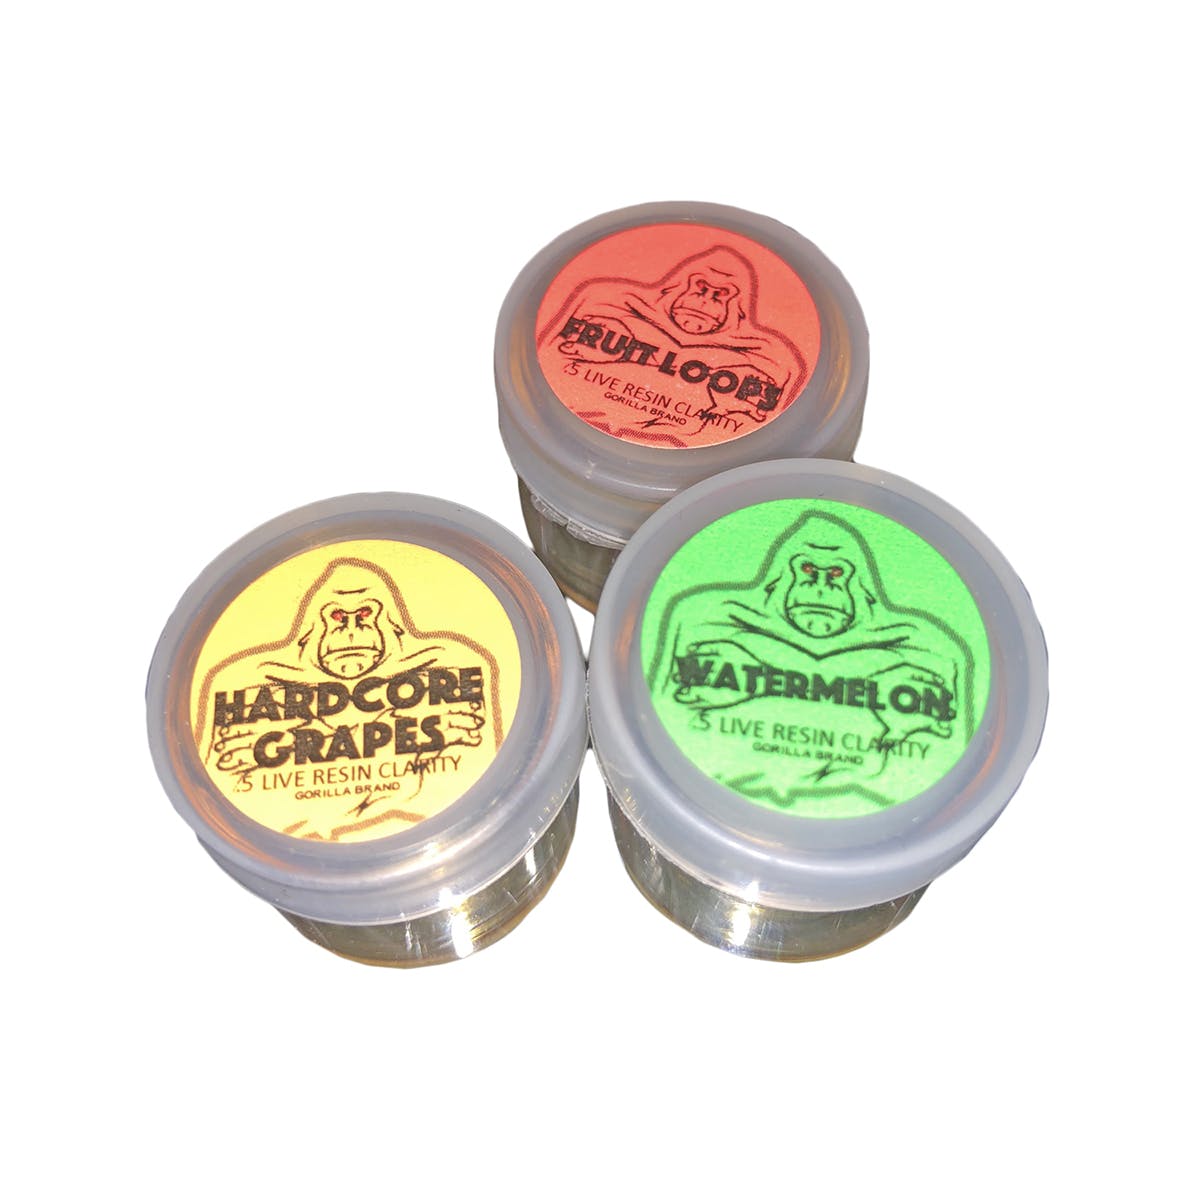 Hardcore Grapes Live Resin Clarity